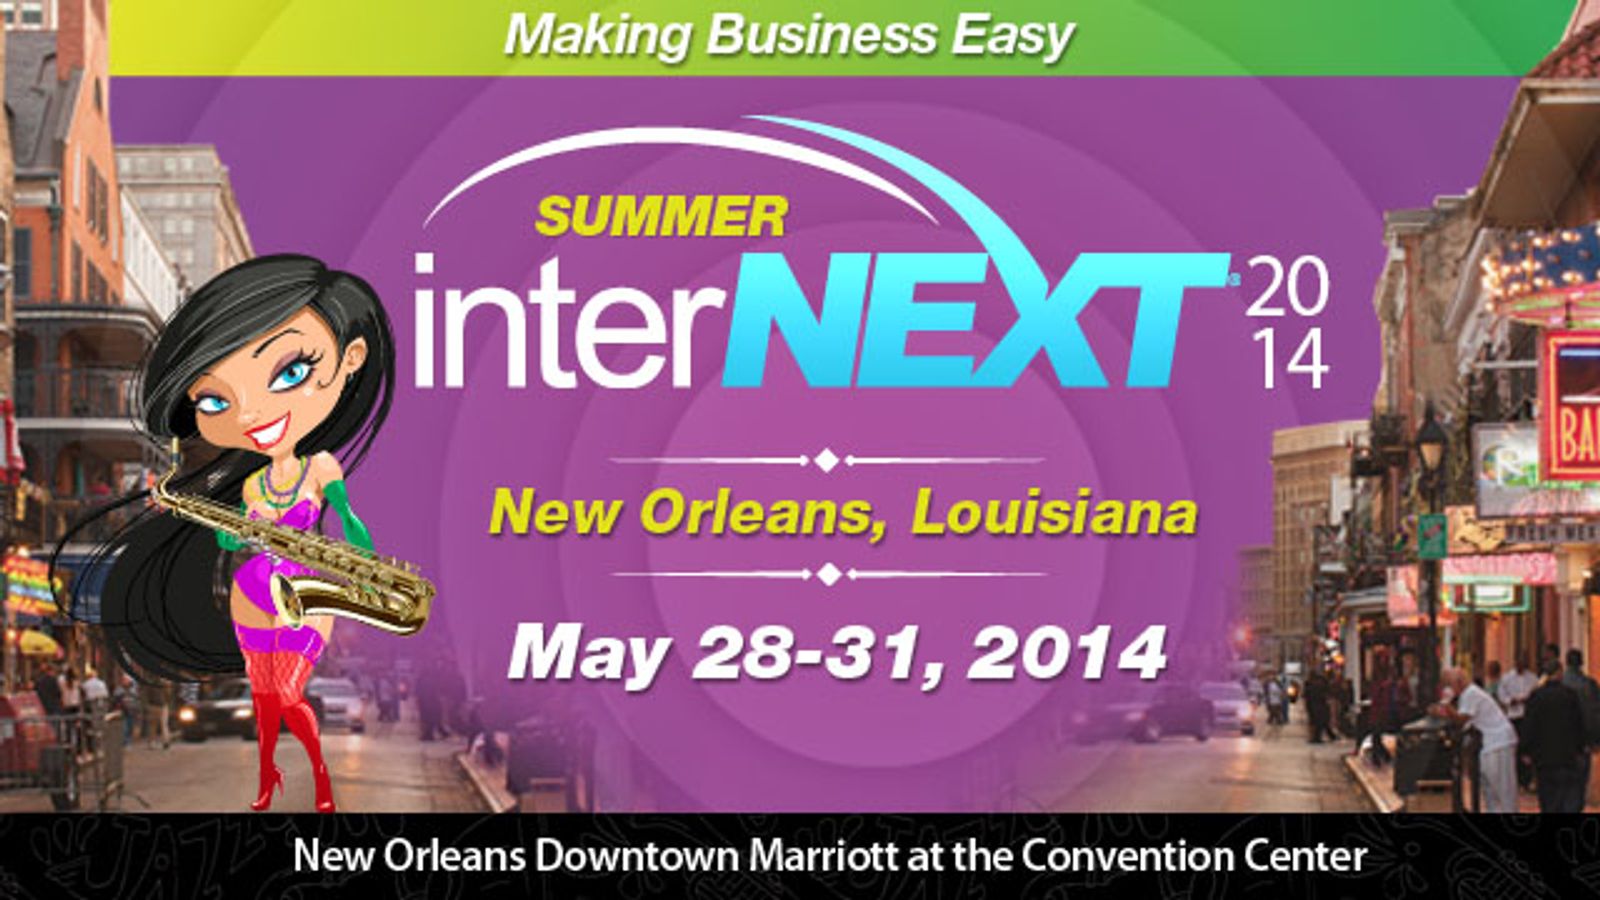 Last Chance to Book Internext New Orleans Hotel Rooms!